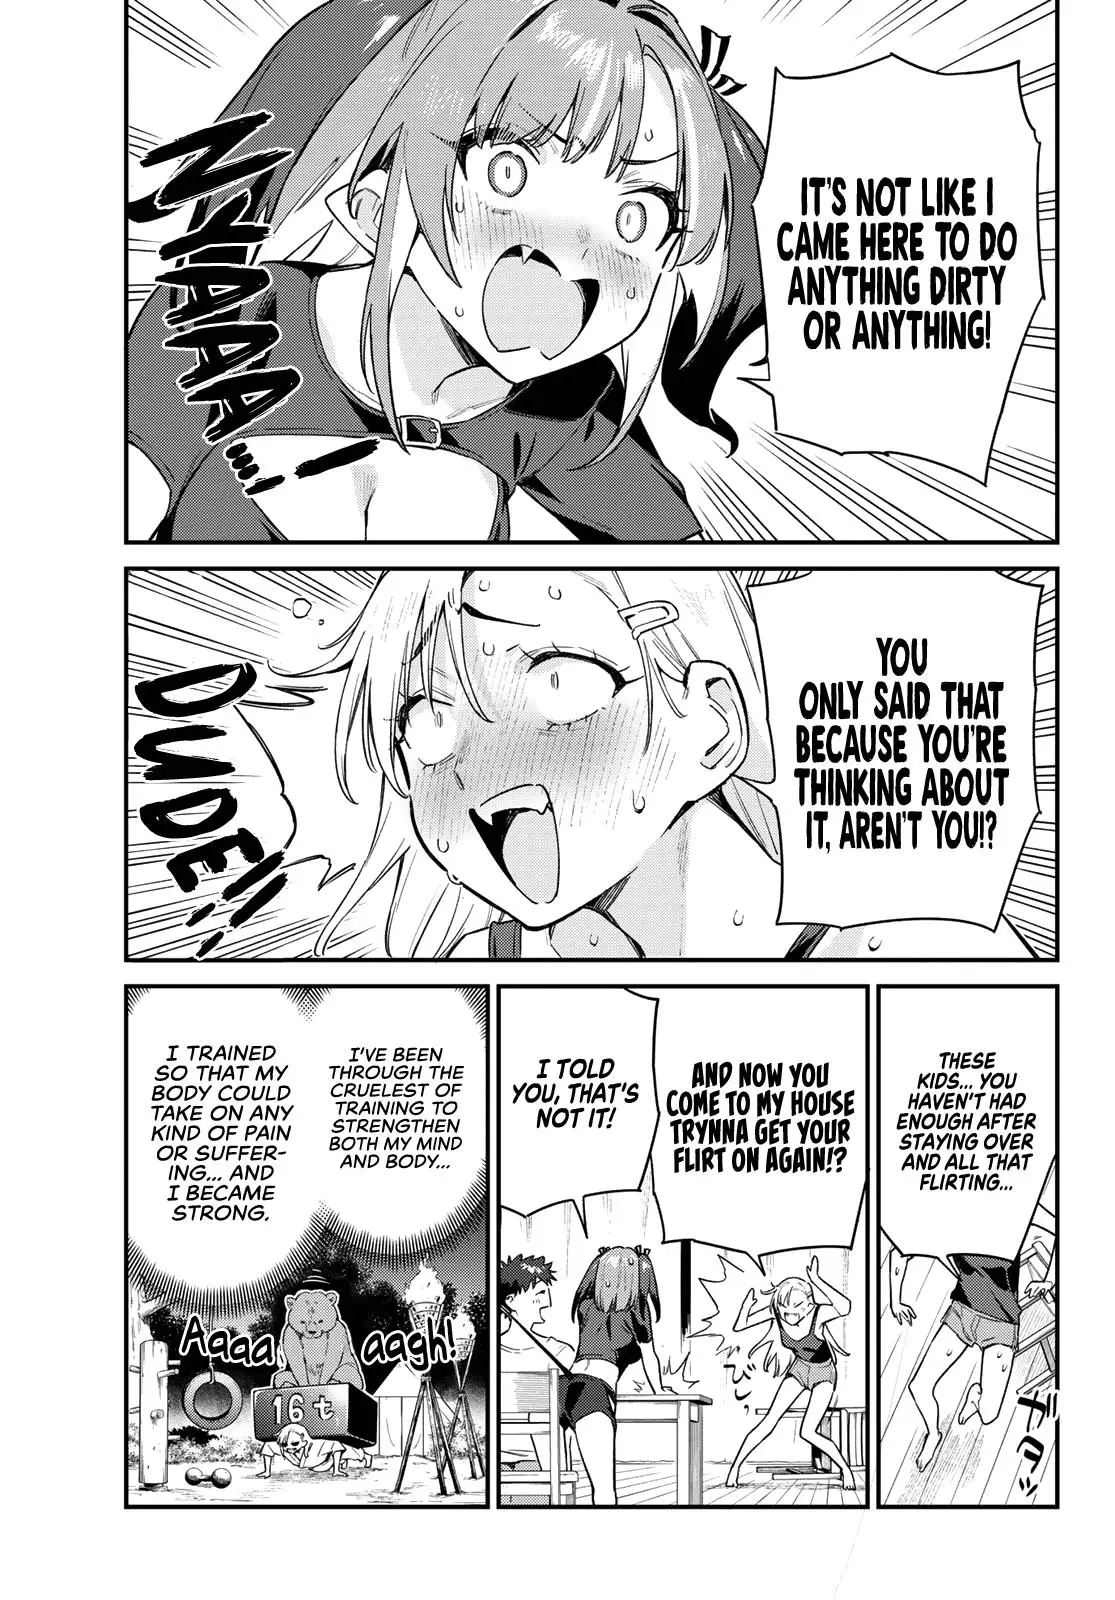 Kanan-Sama Is Easy As Hell! - 58 page 8-43ef161a